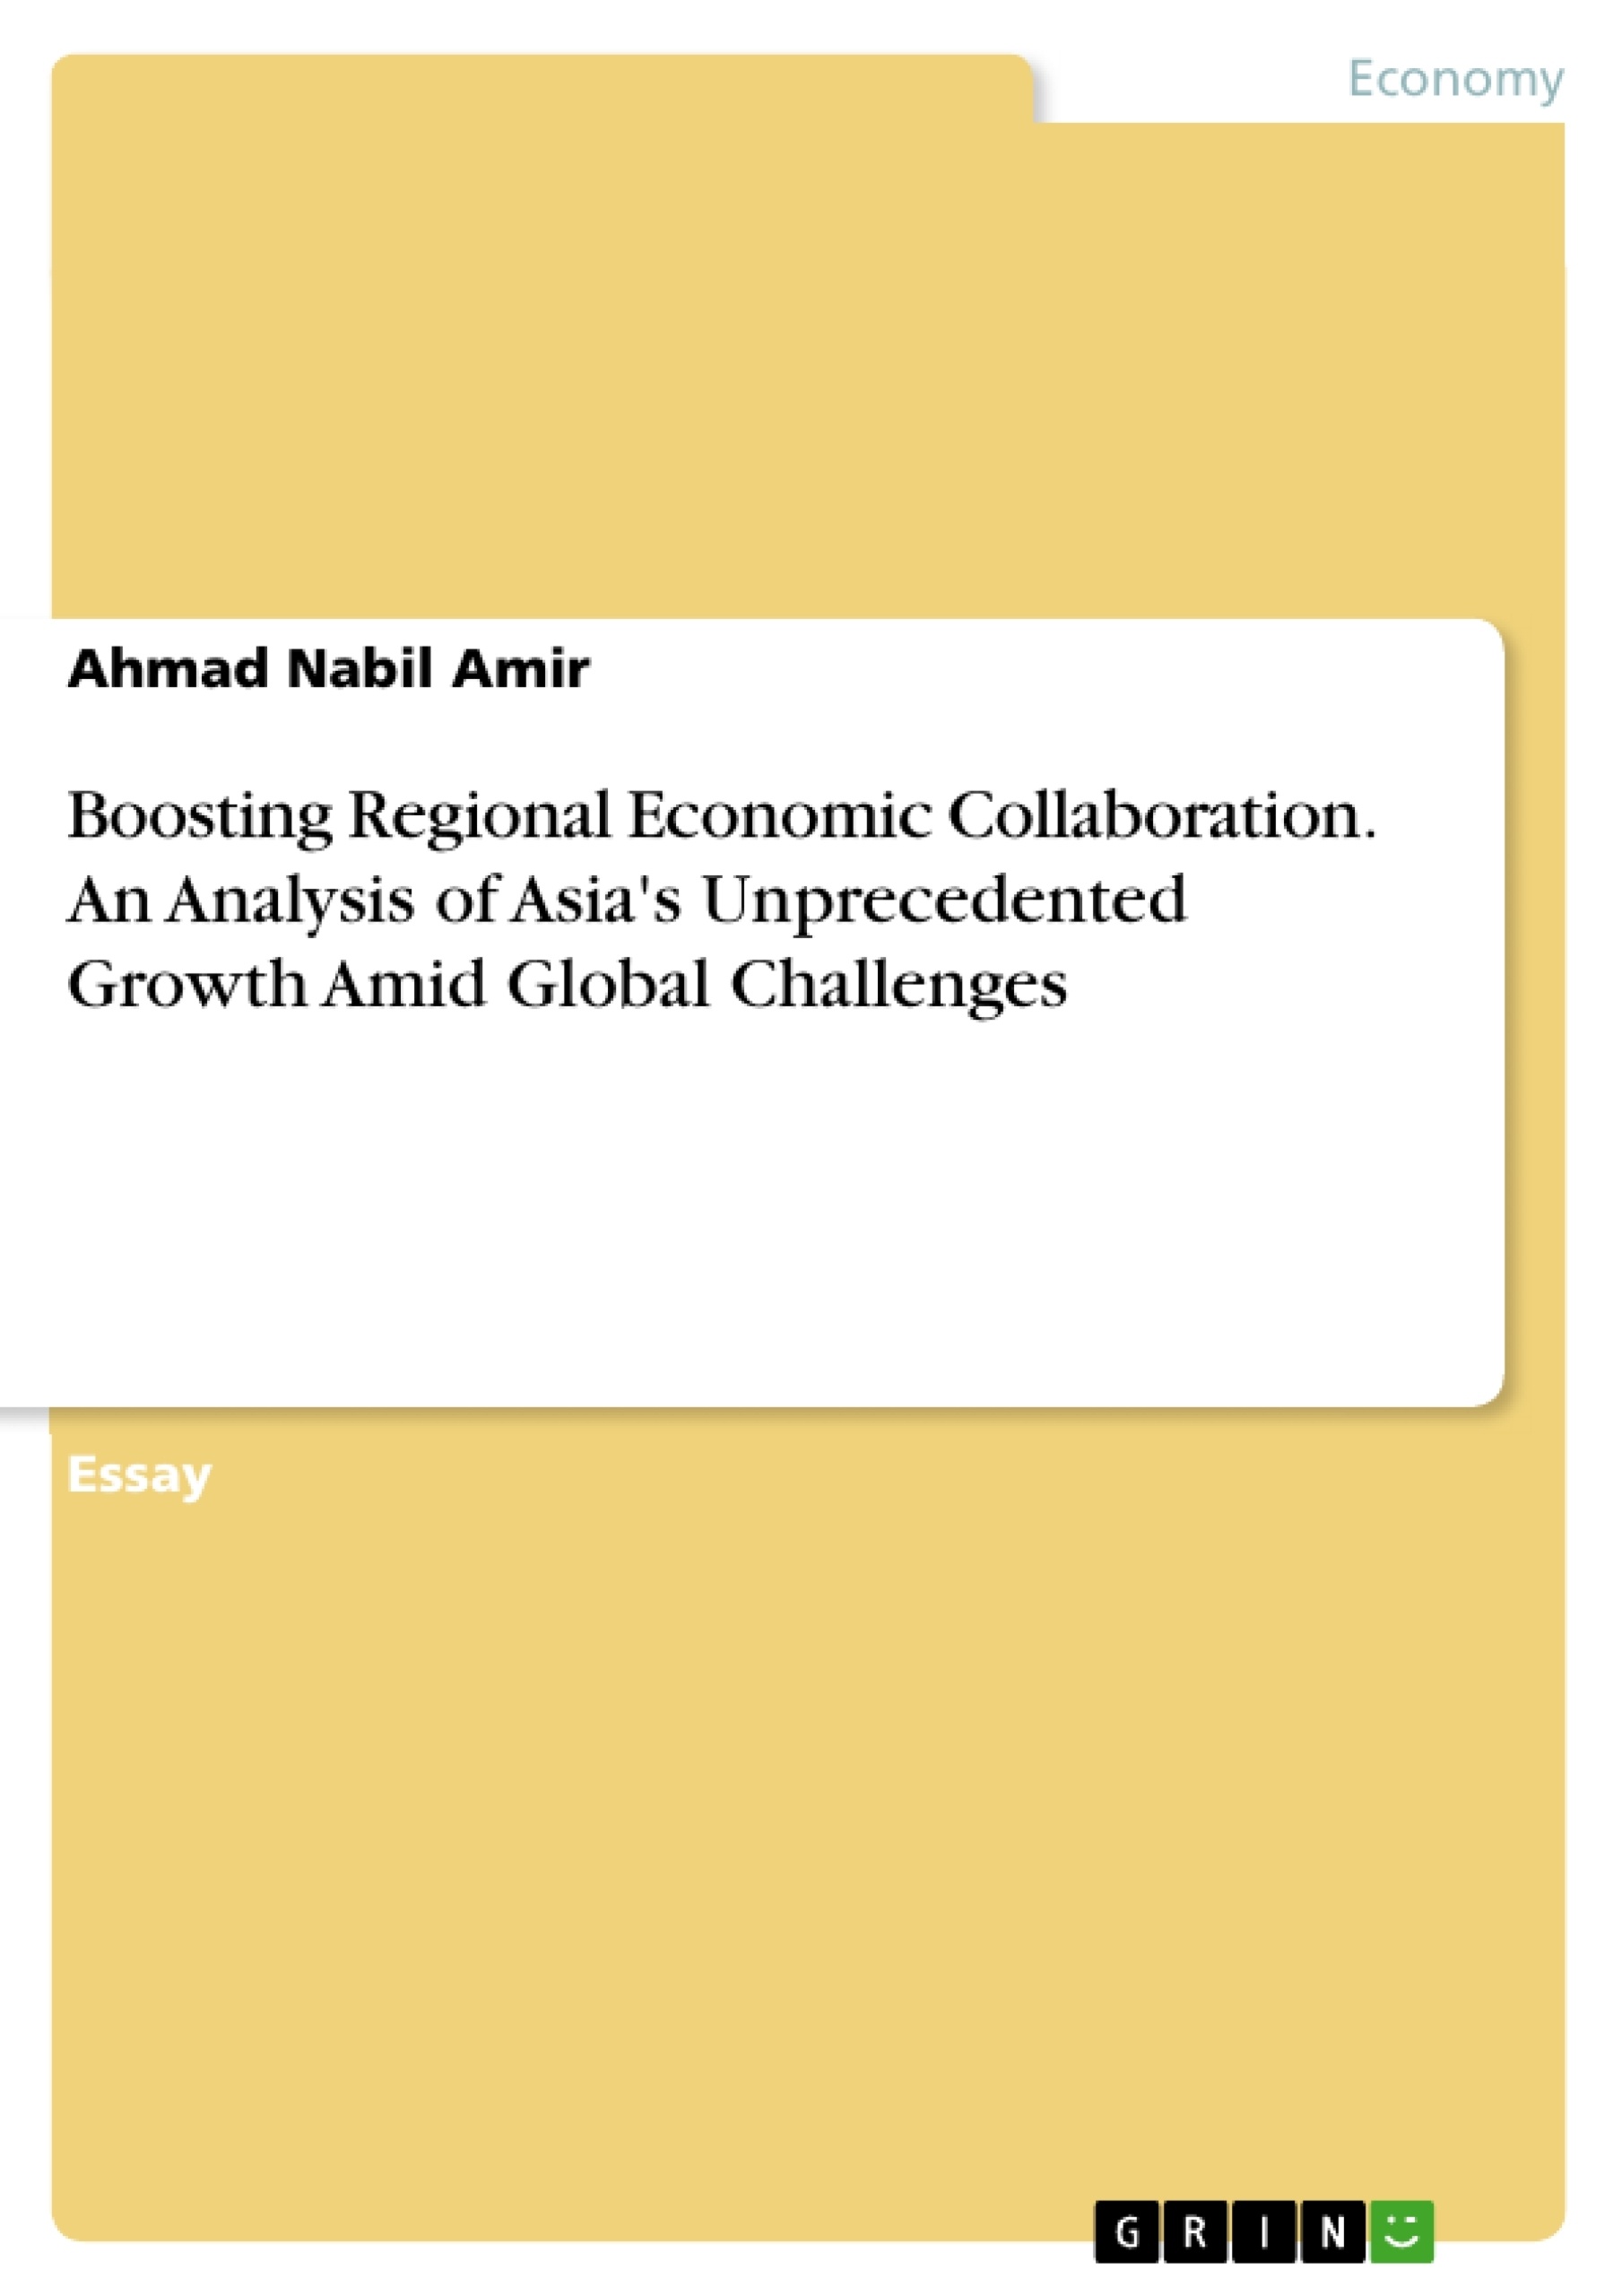 Title: Boosting Regional Economic Collaboration. An Analysis of Asia's Unprecedented Growth Amid Global Challenges